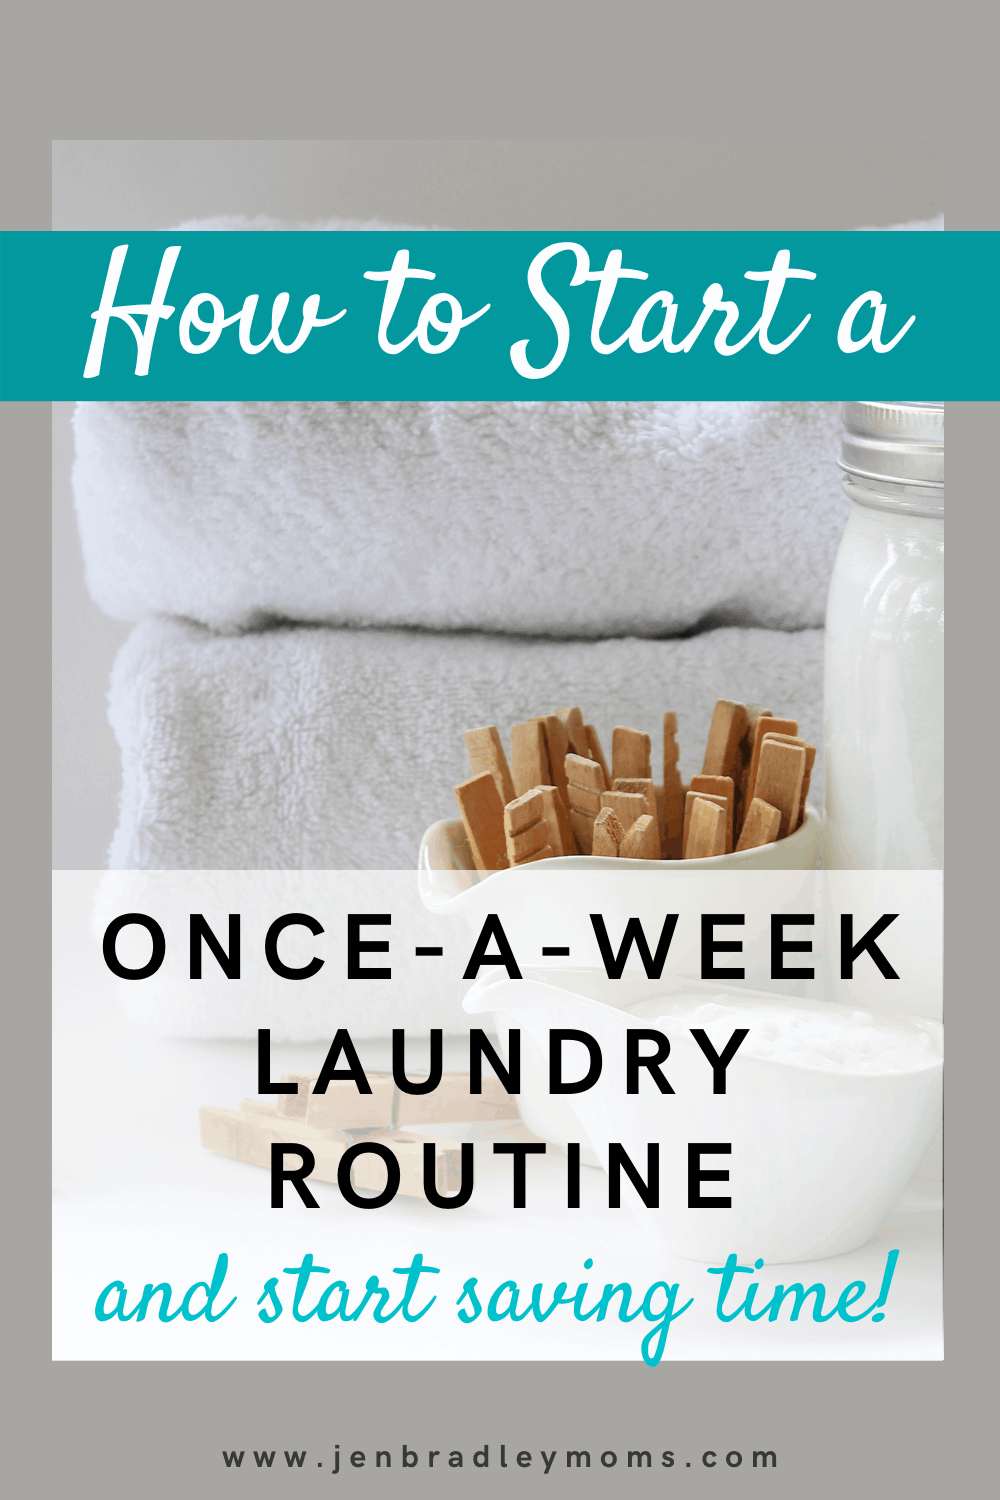 How to Make the Switch to a Once-a-Week Family Laundry Schedule